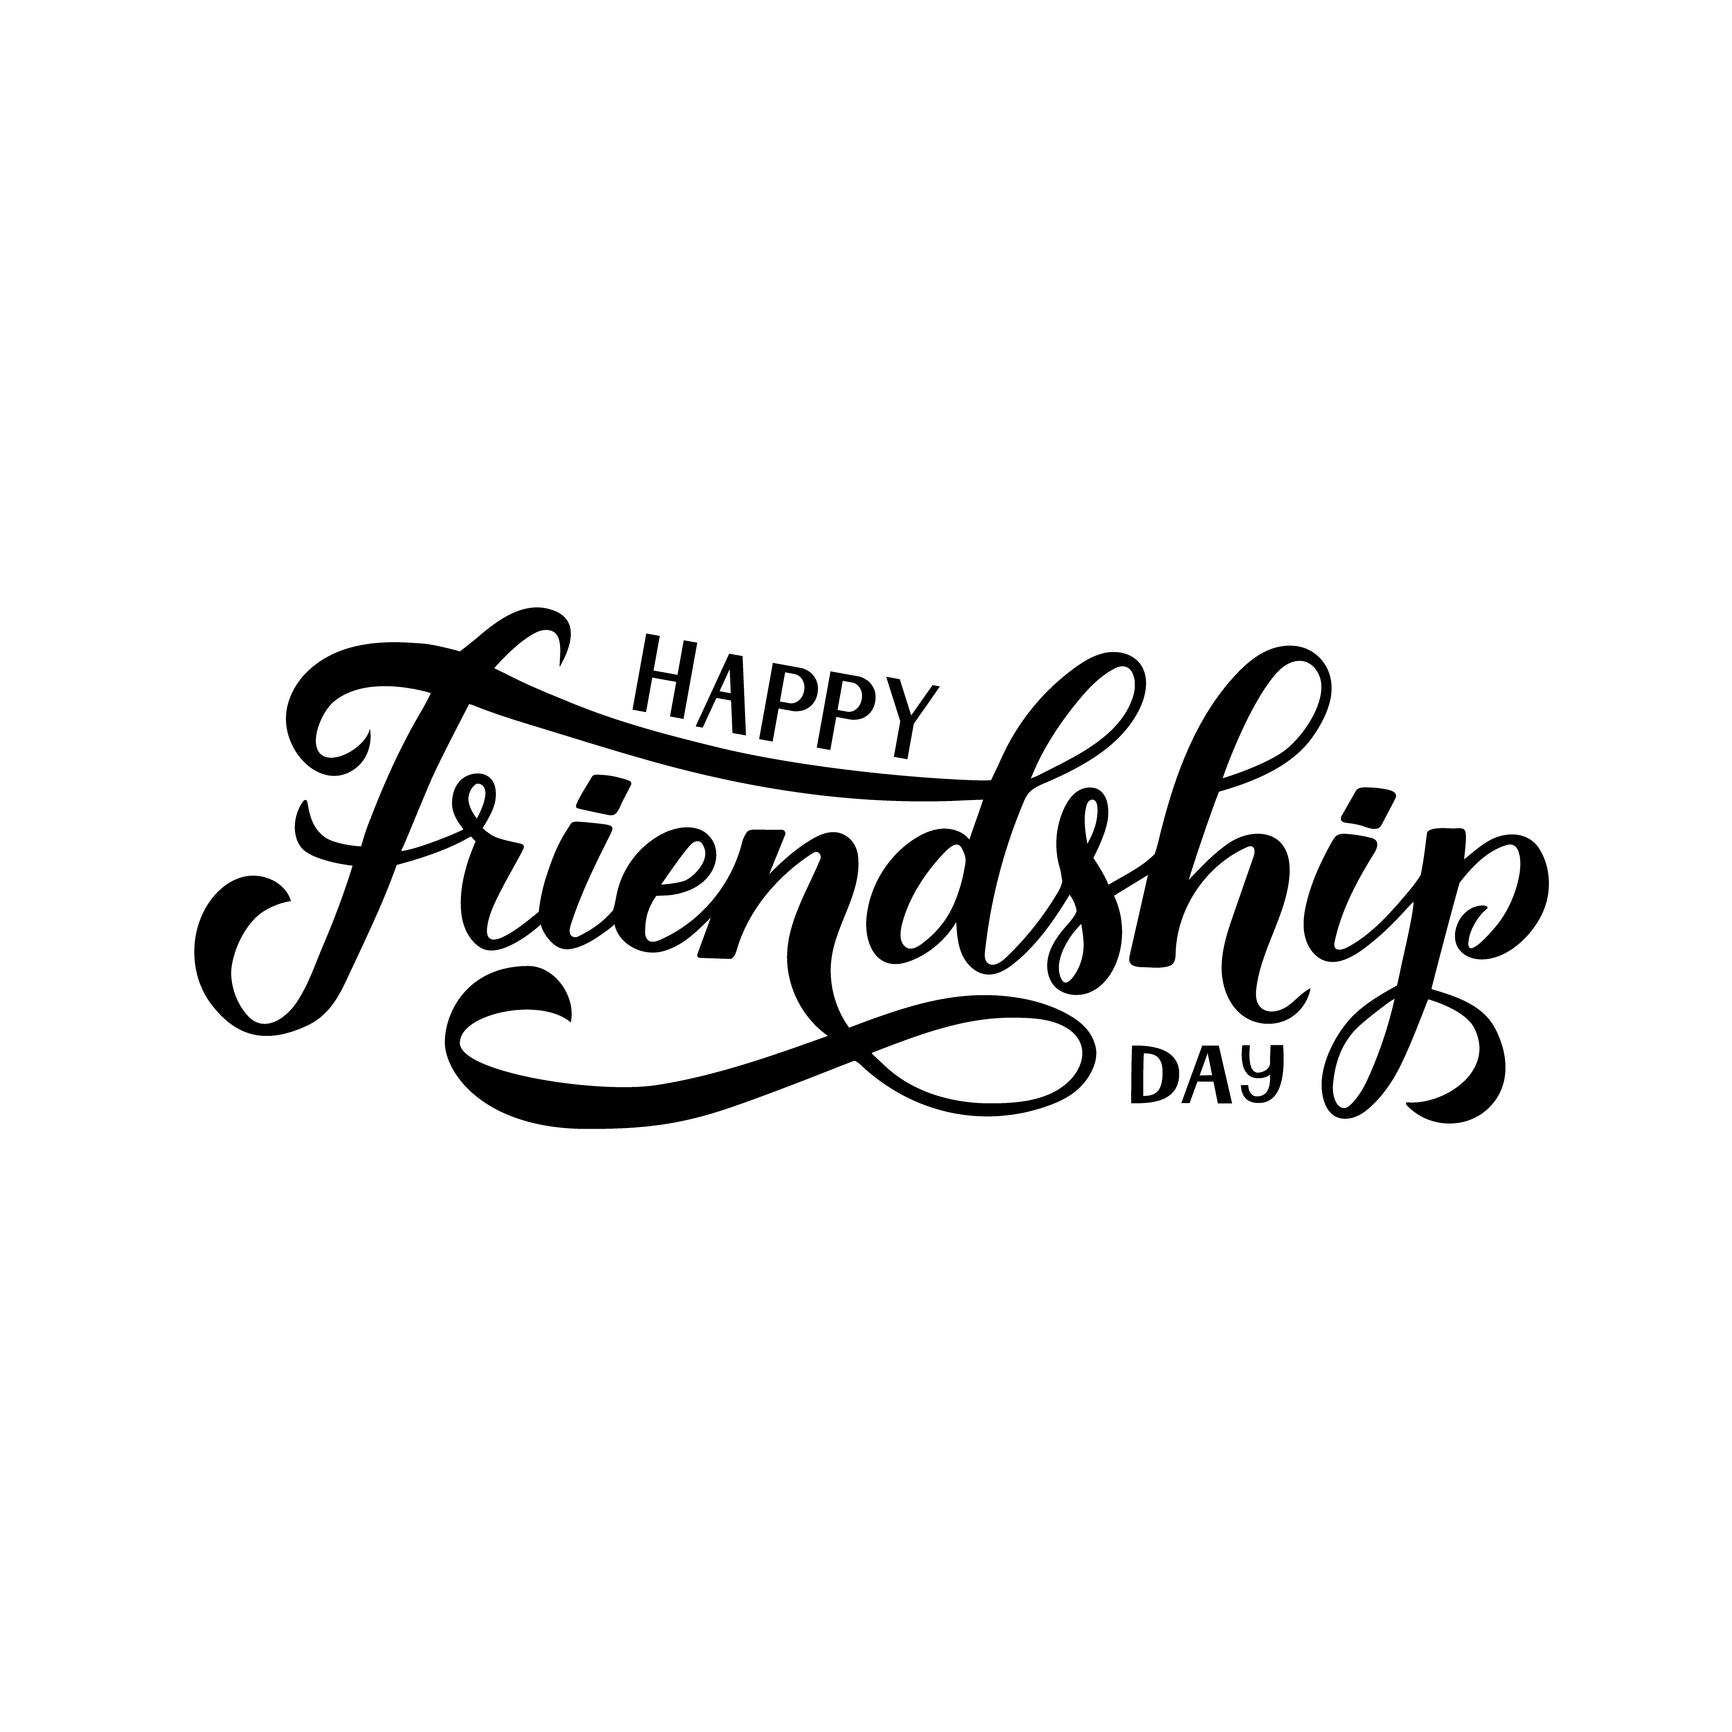 Happy Friendship Day 2021: Wishes, Quotes